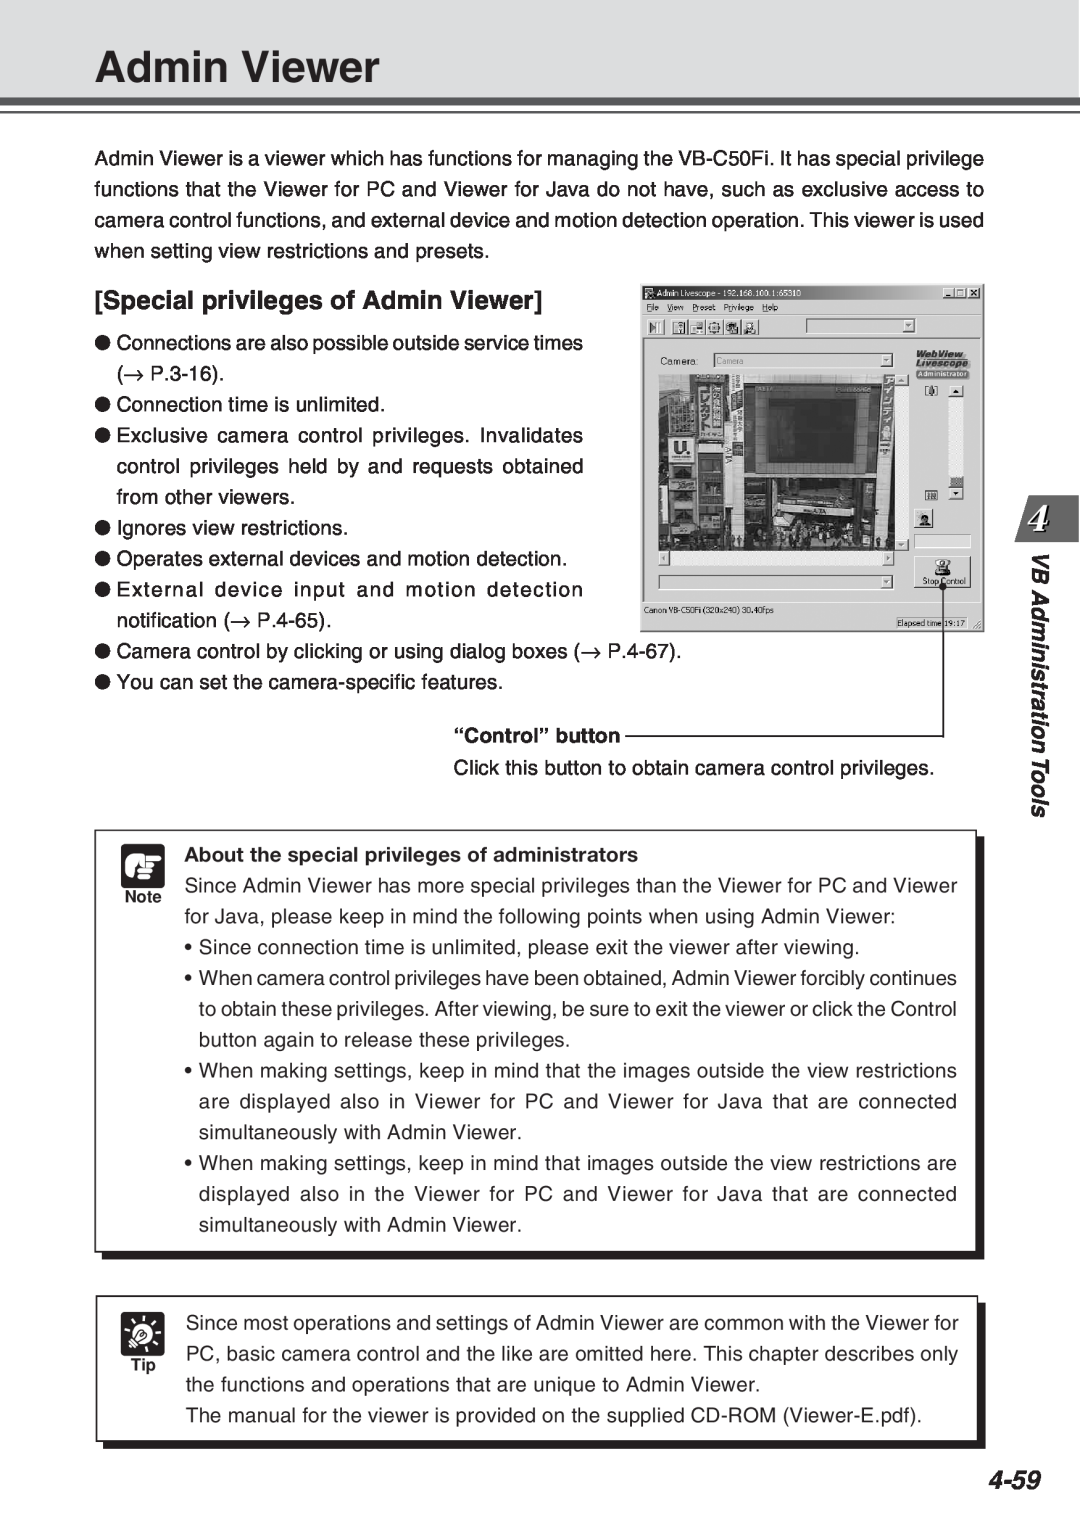 Canon Vb-C50fi user manual Special privileges of Admin Viewer, 4-59, Tools, “Control” button 